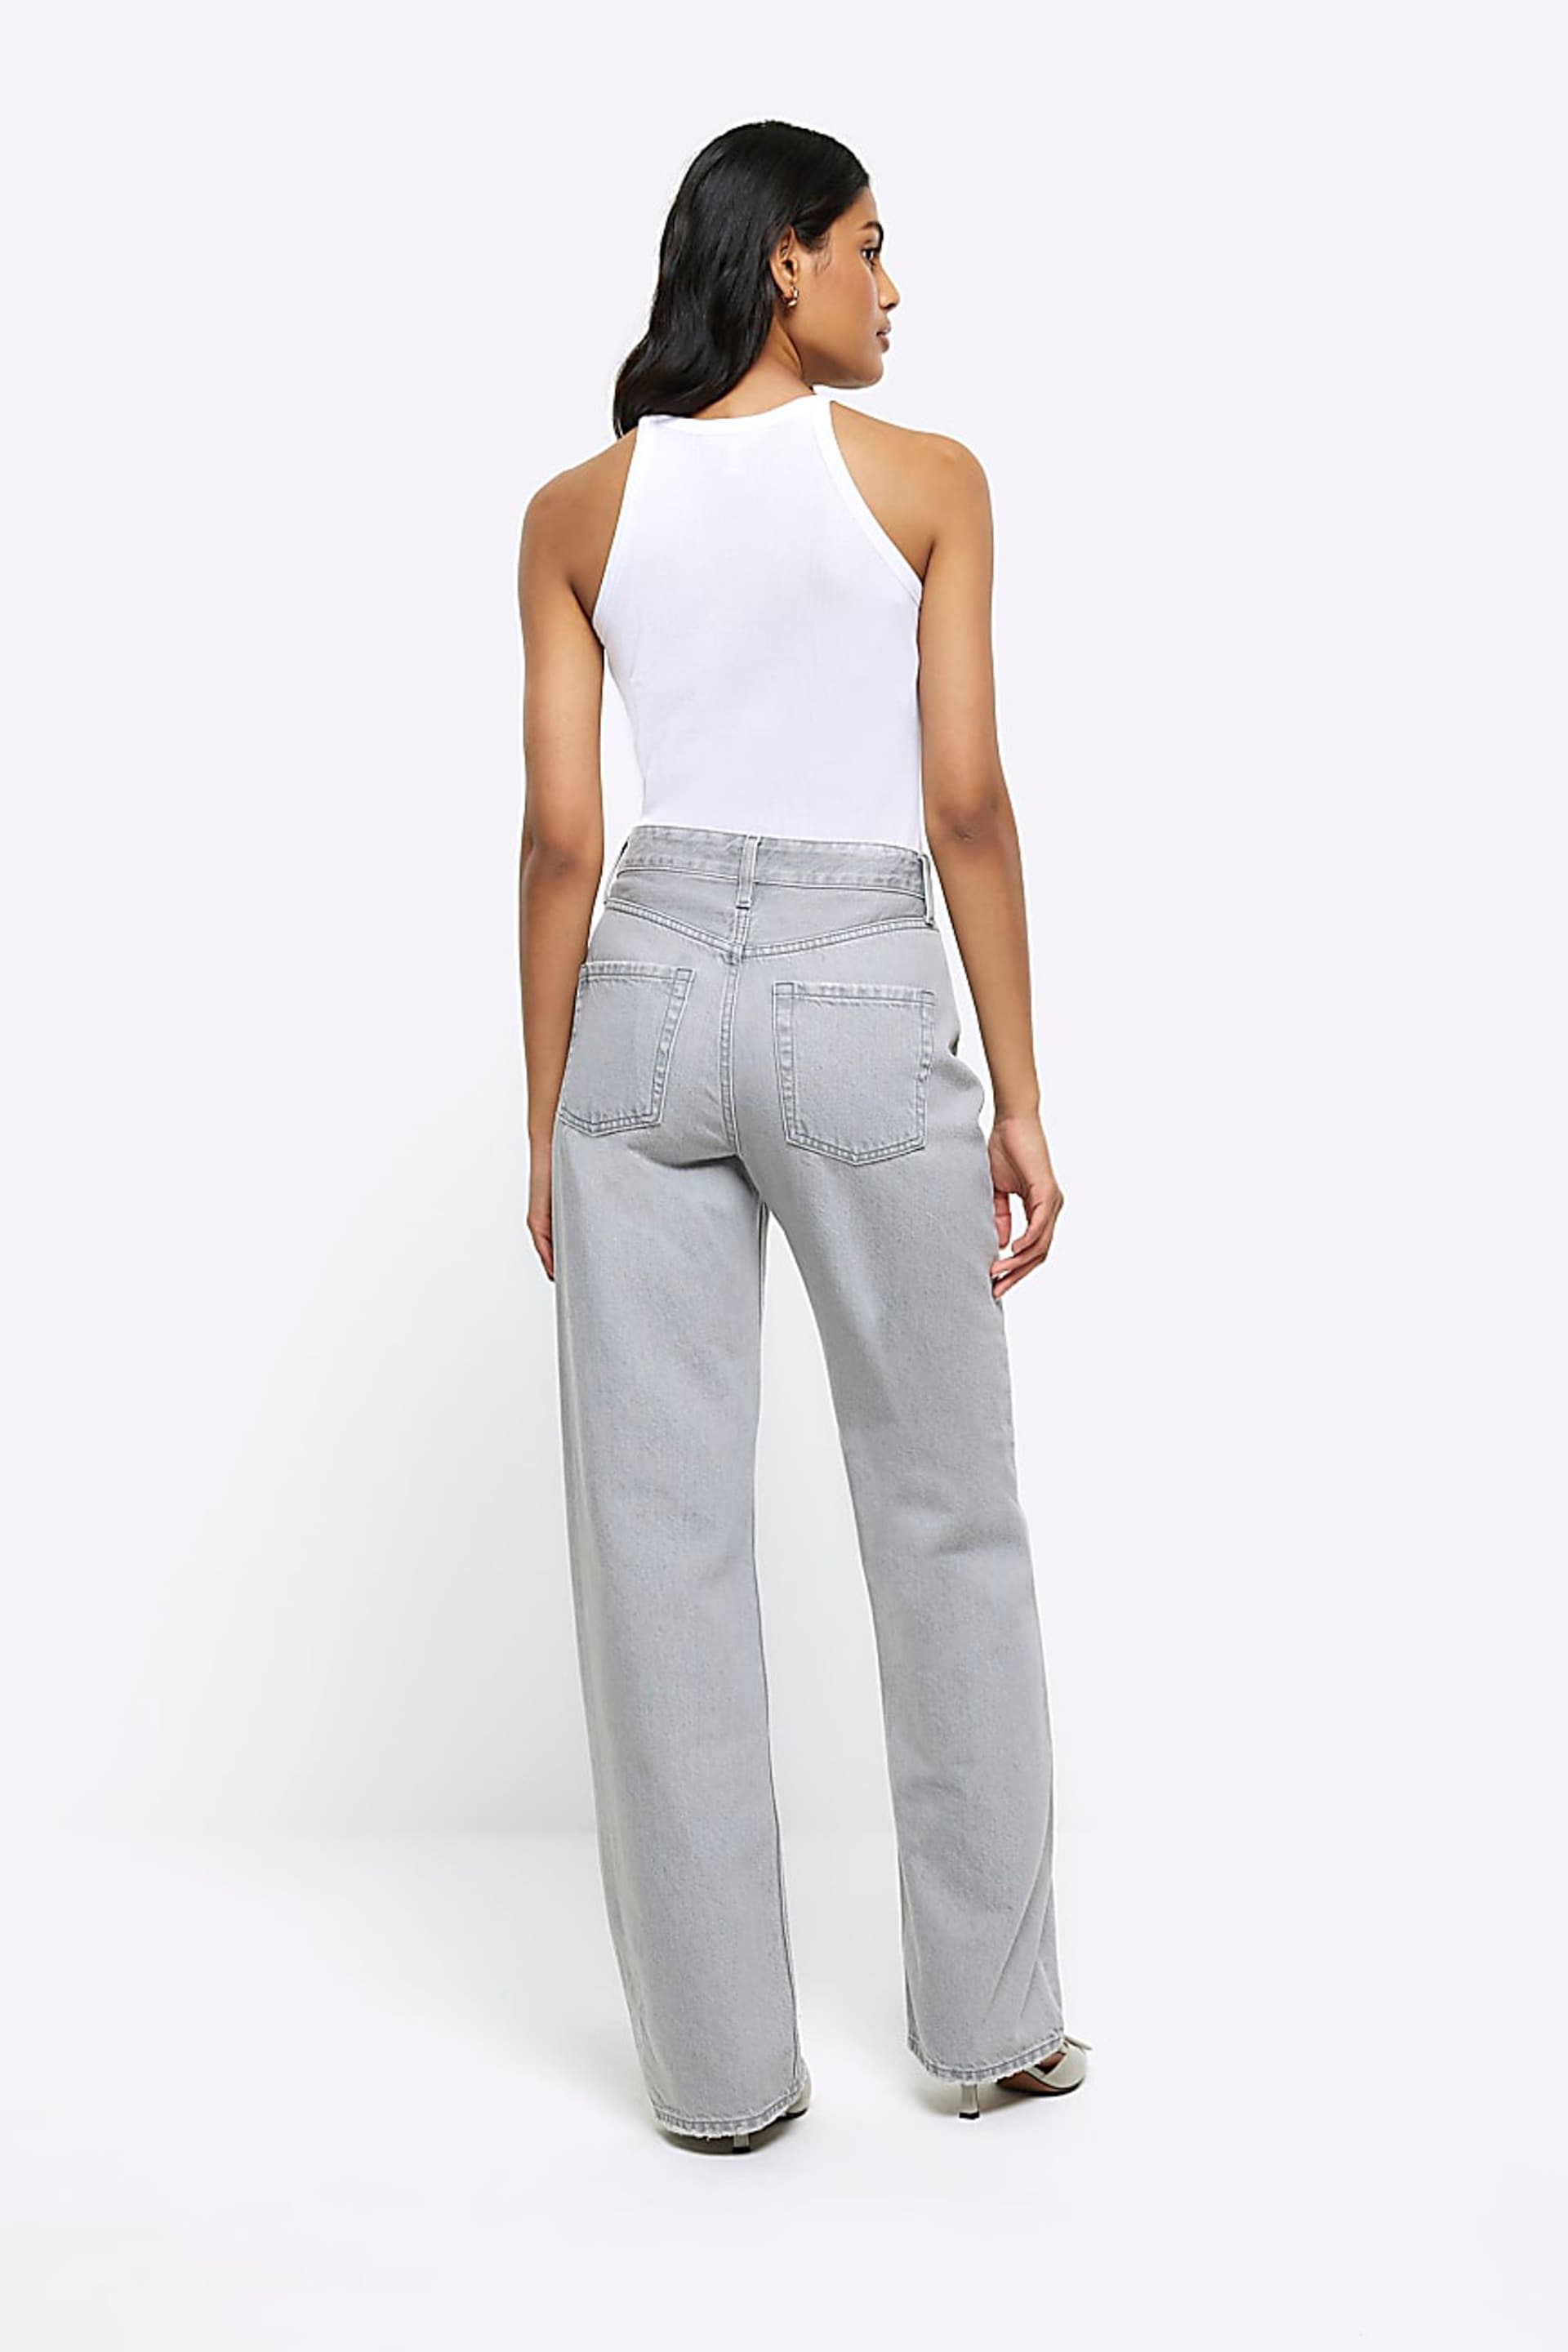 River Island Grey High Rise 90's Straight Leg Jeans - Image 2 of 6